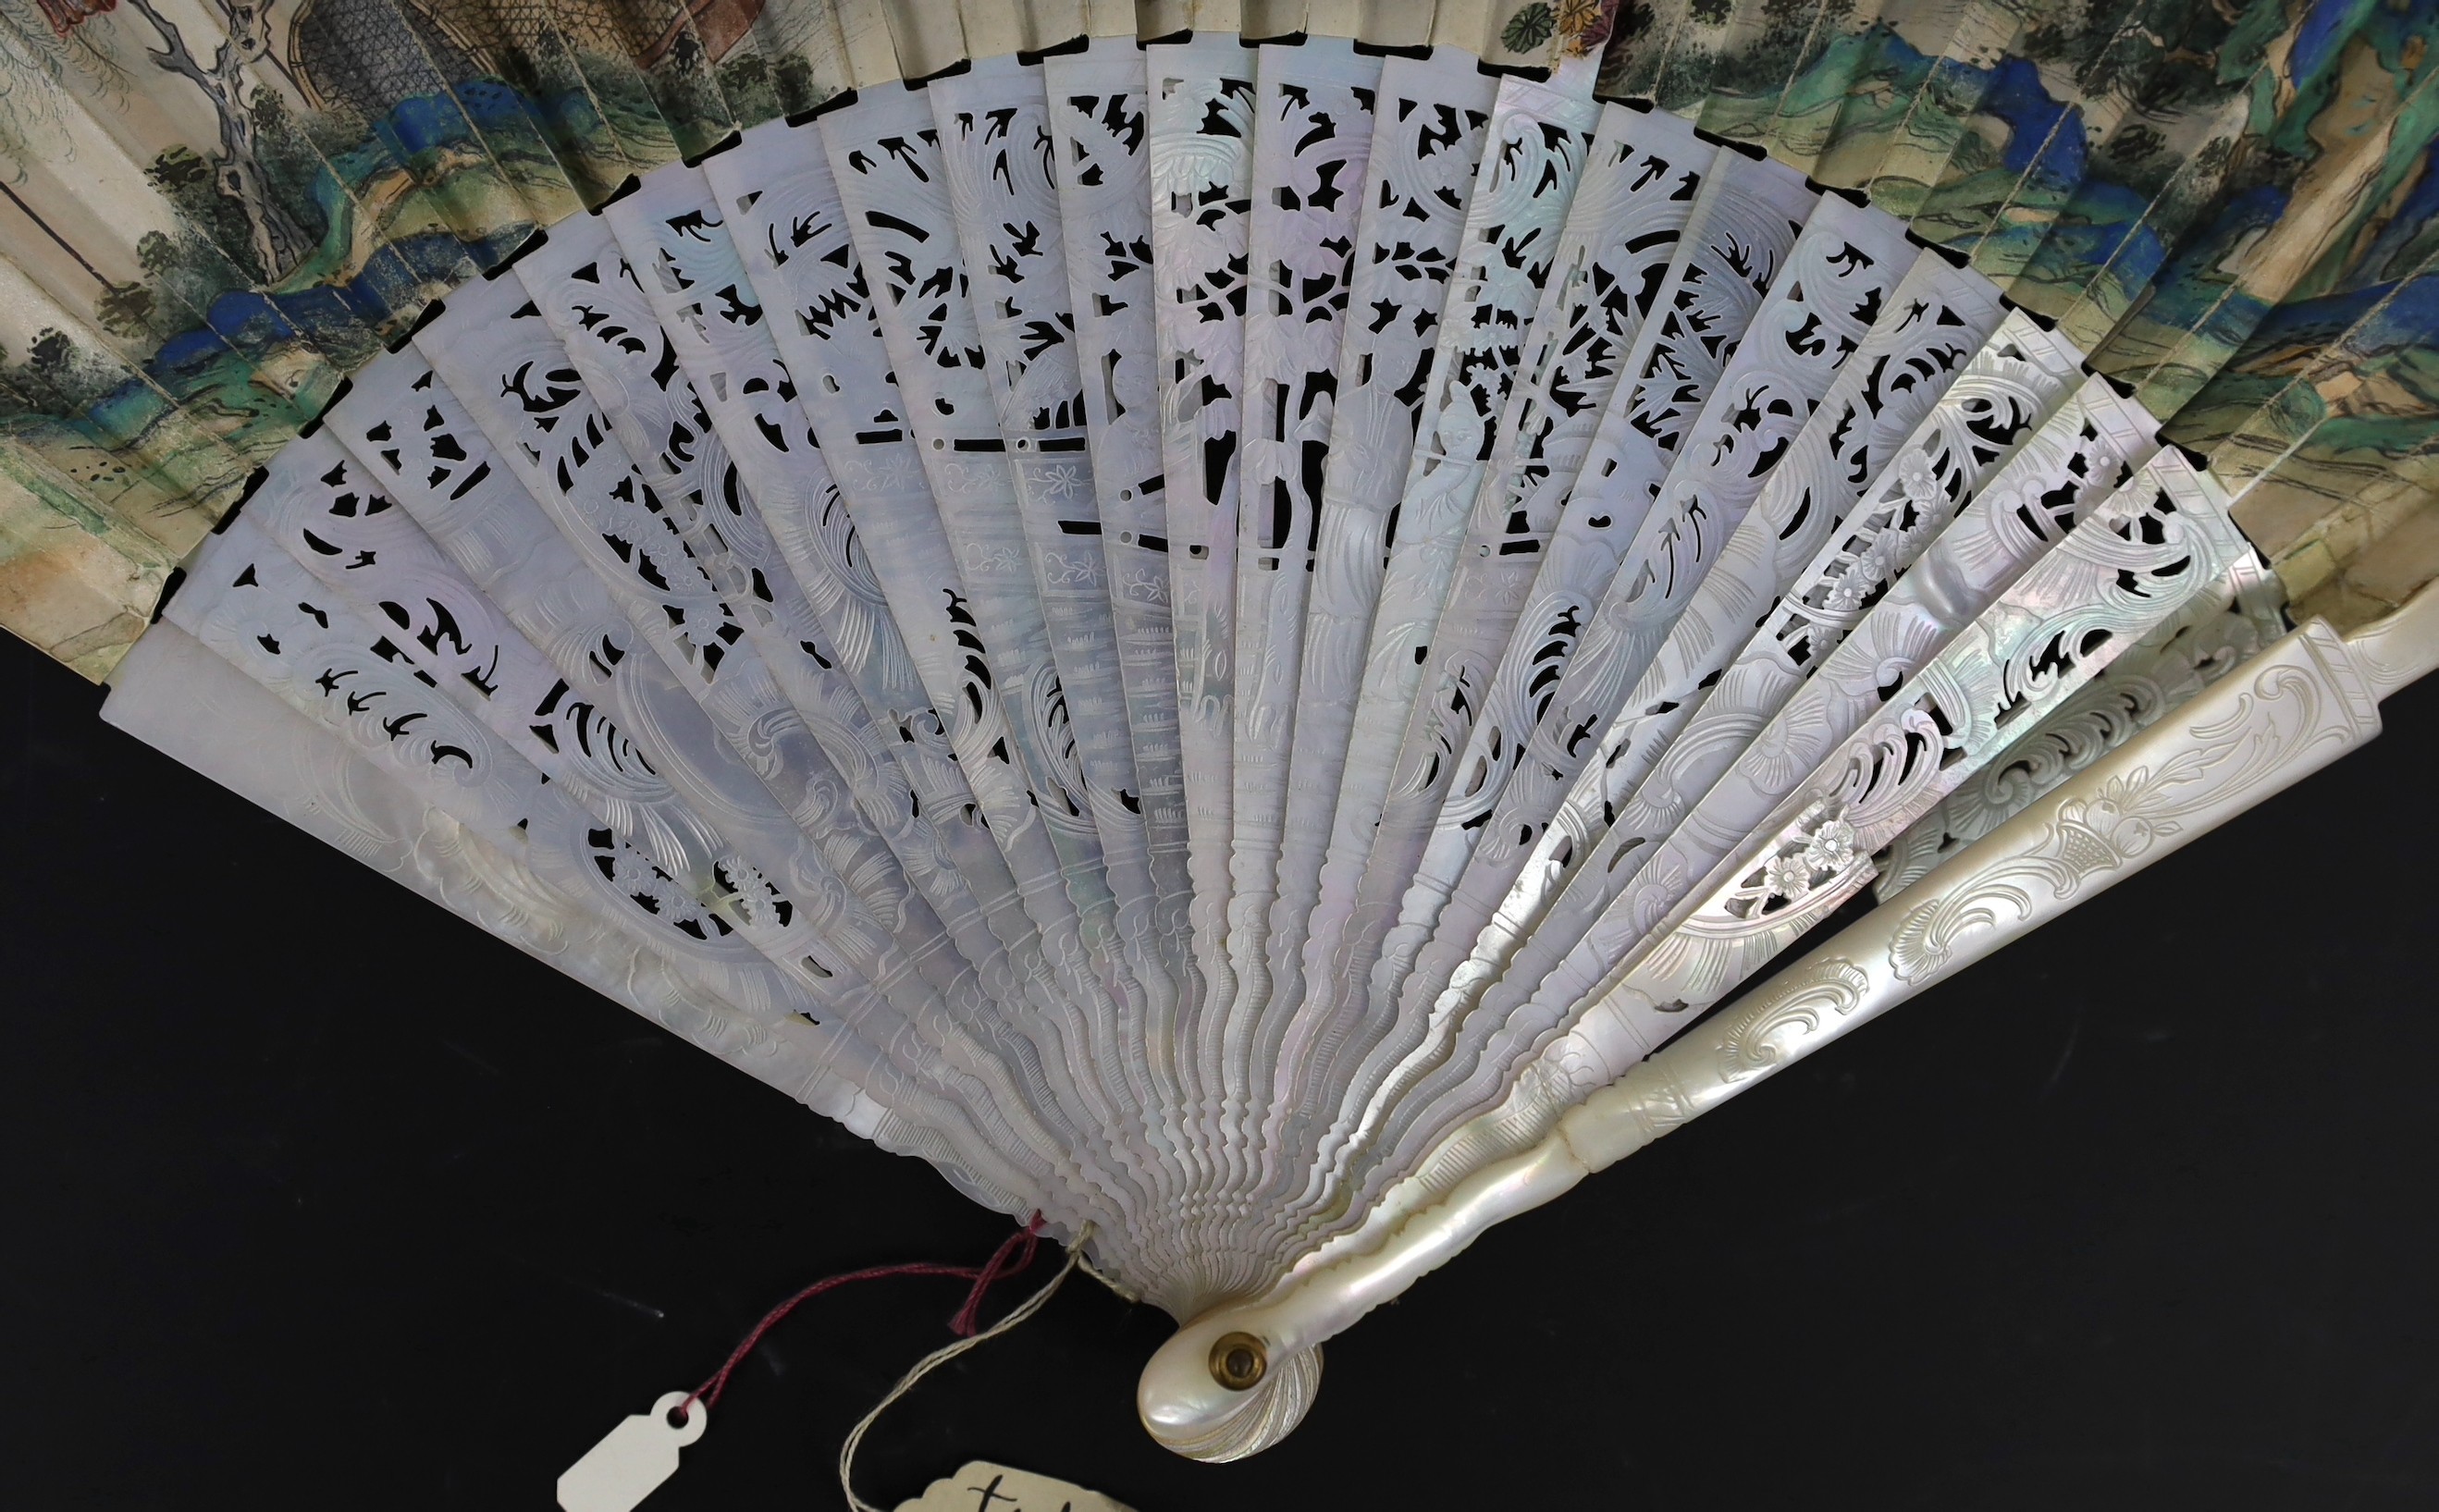 A Chinese painted leaf fan with mother-of-pearl sticks, 19th century, 28cm, some damage to mother-of-pearl